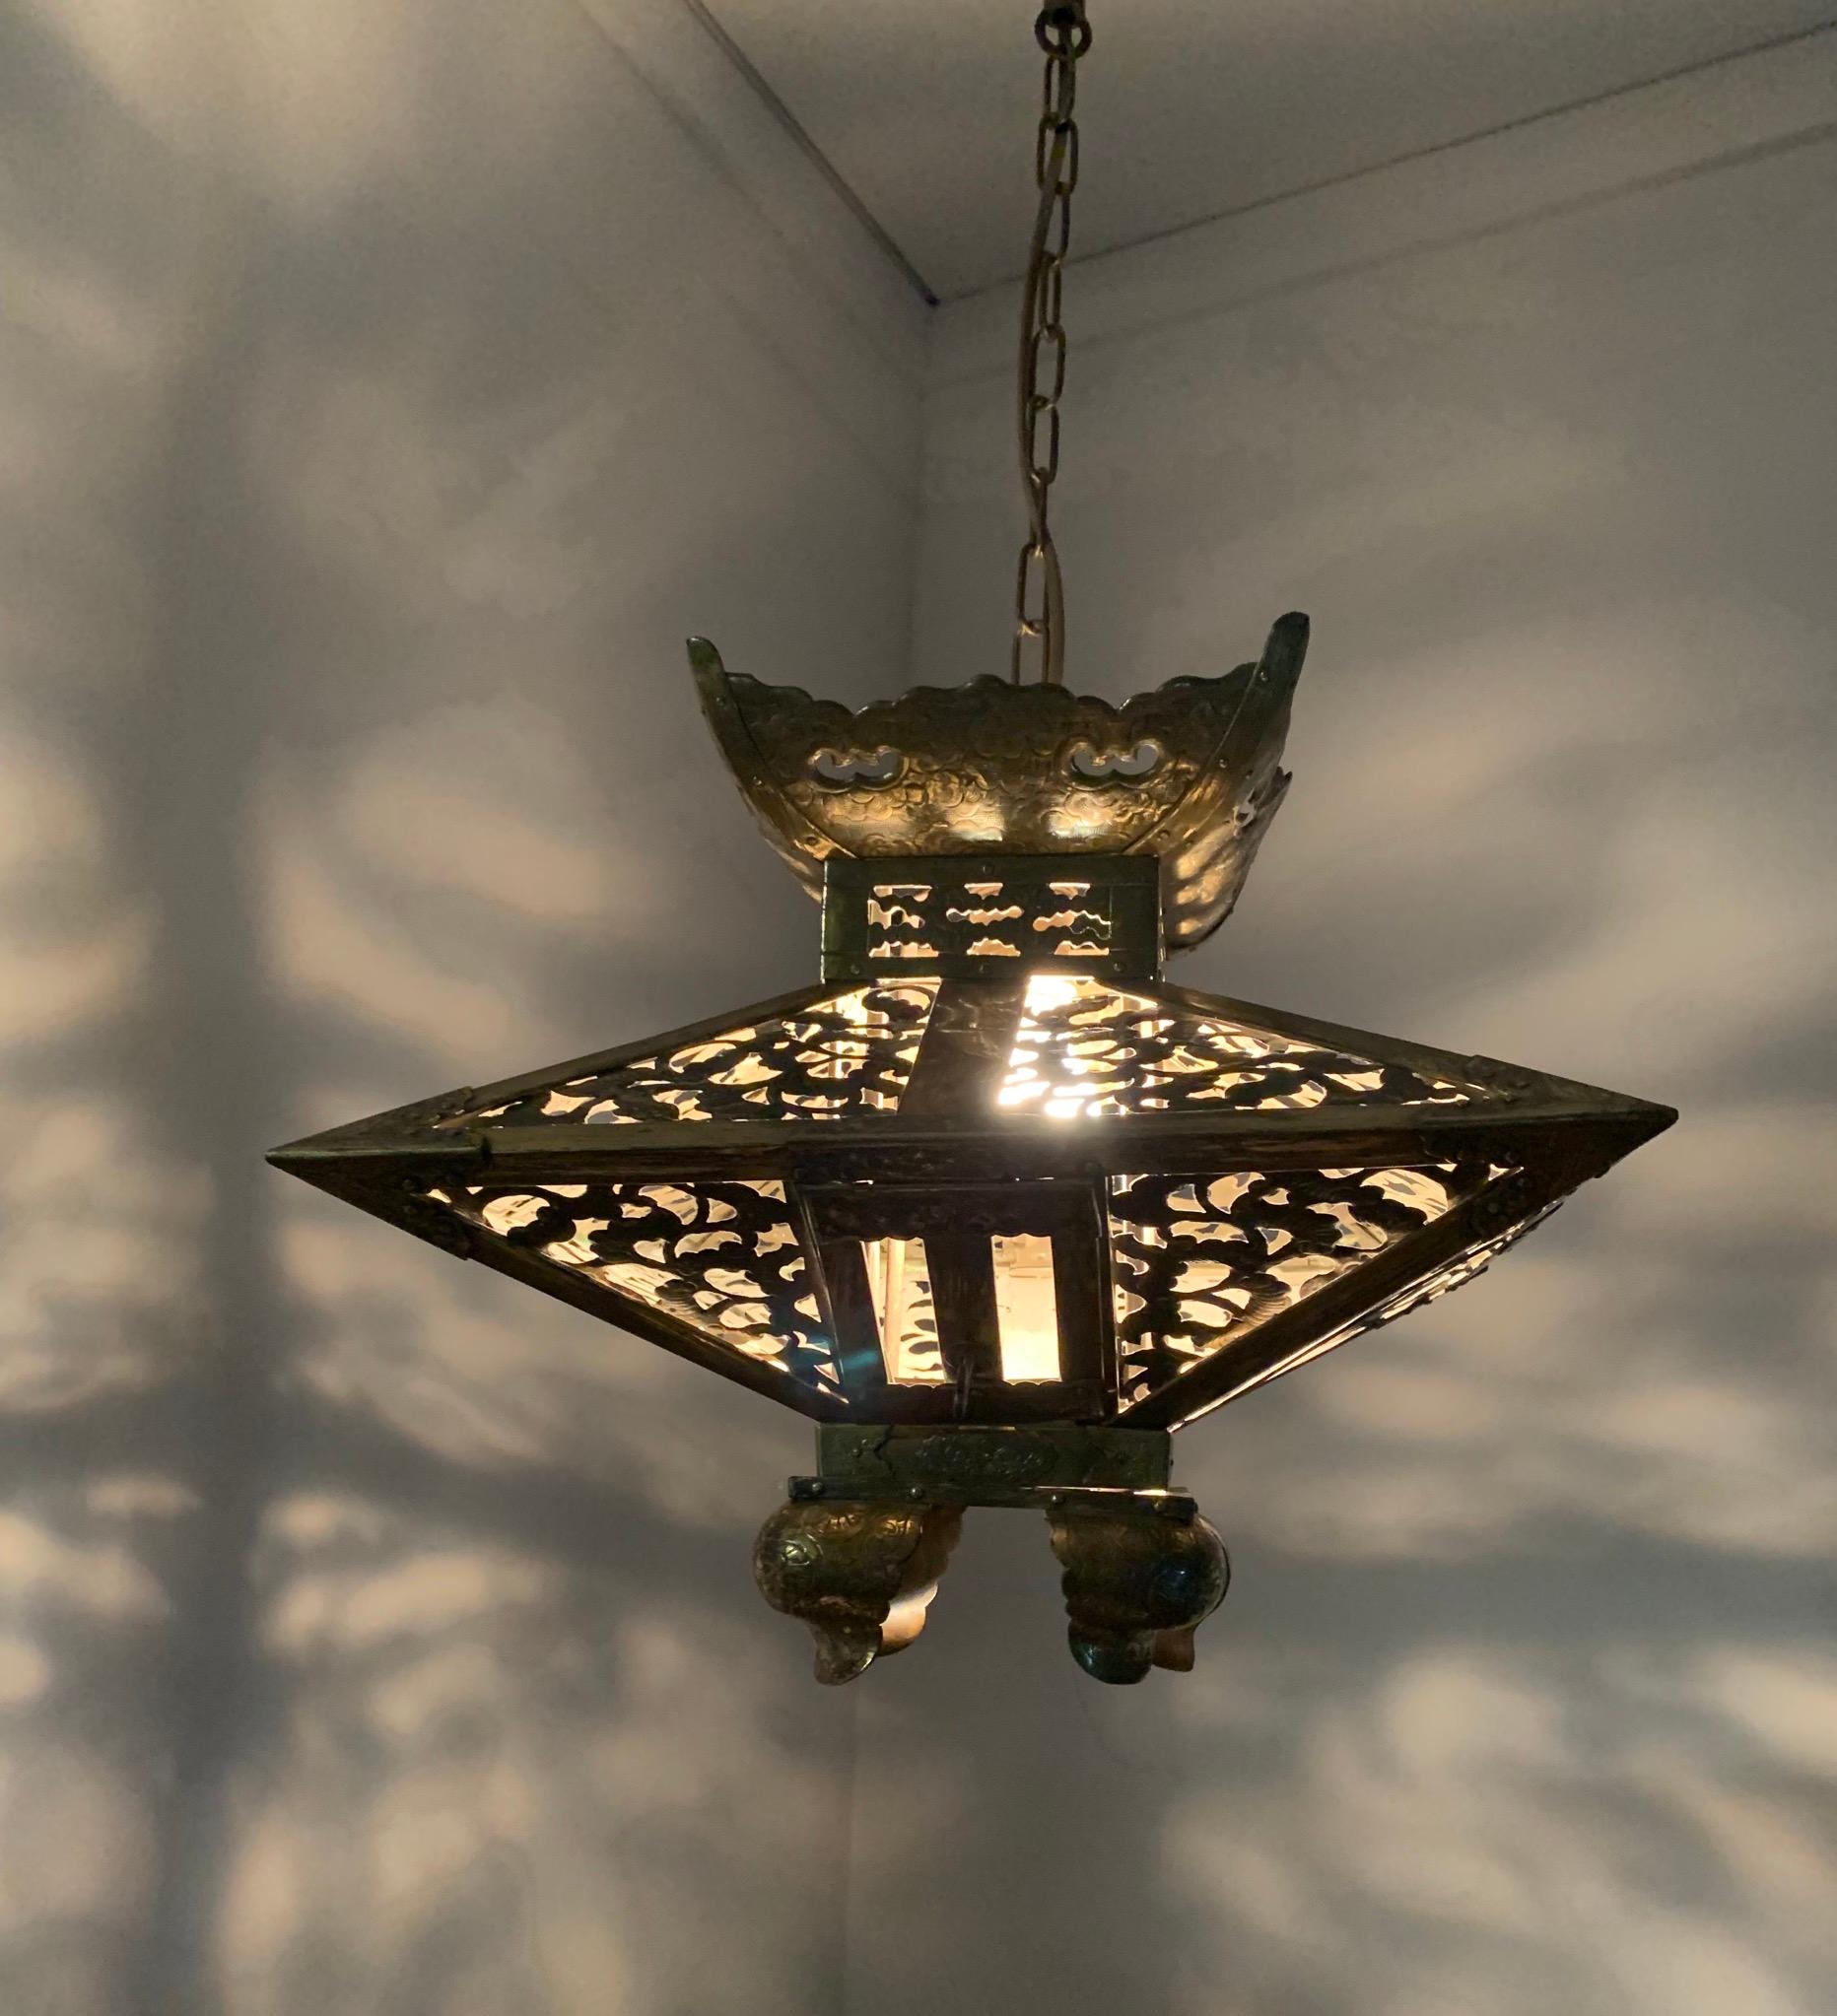 One of a kind, early 1900s Arts and Crafts light fixture.

This antique and extraordinary pendant is another one of our recent, great finds. If you are decorating a room with an oriental theme then this unique, single light pendant should be on your